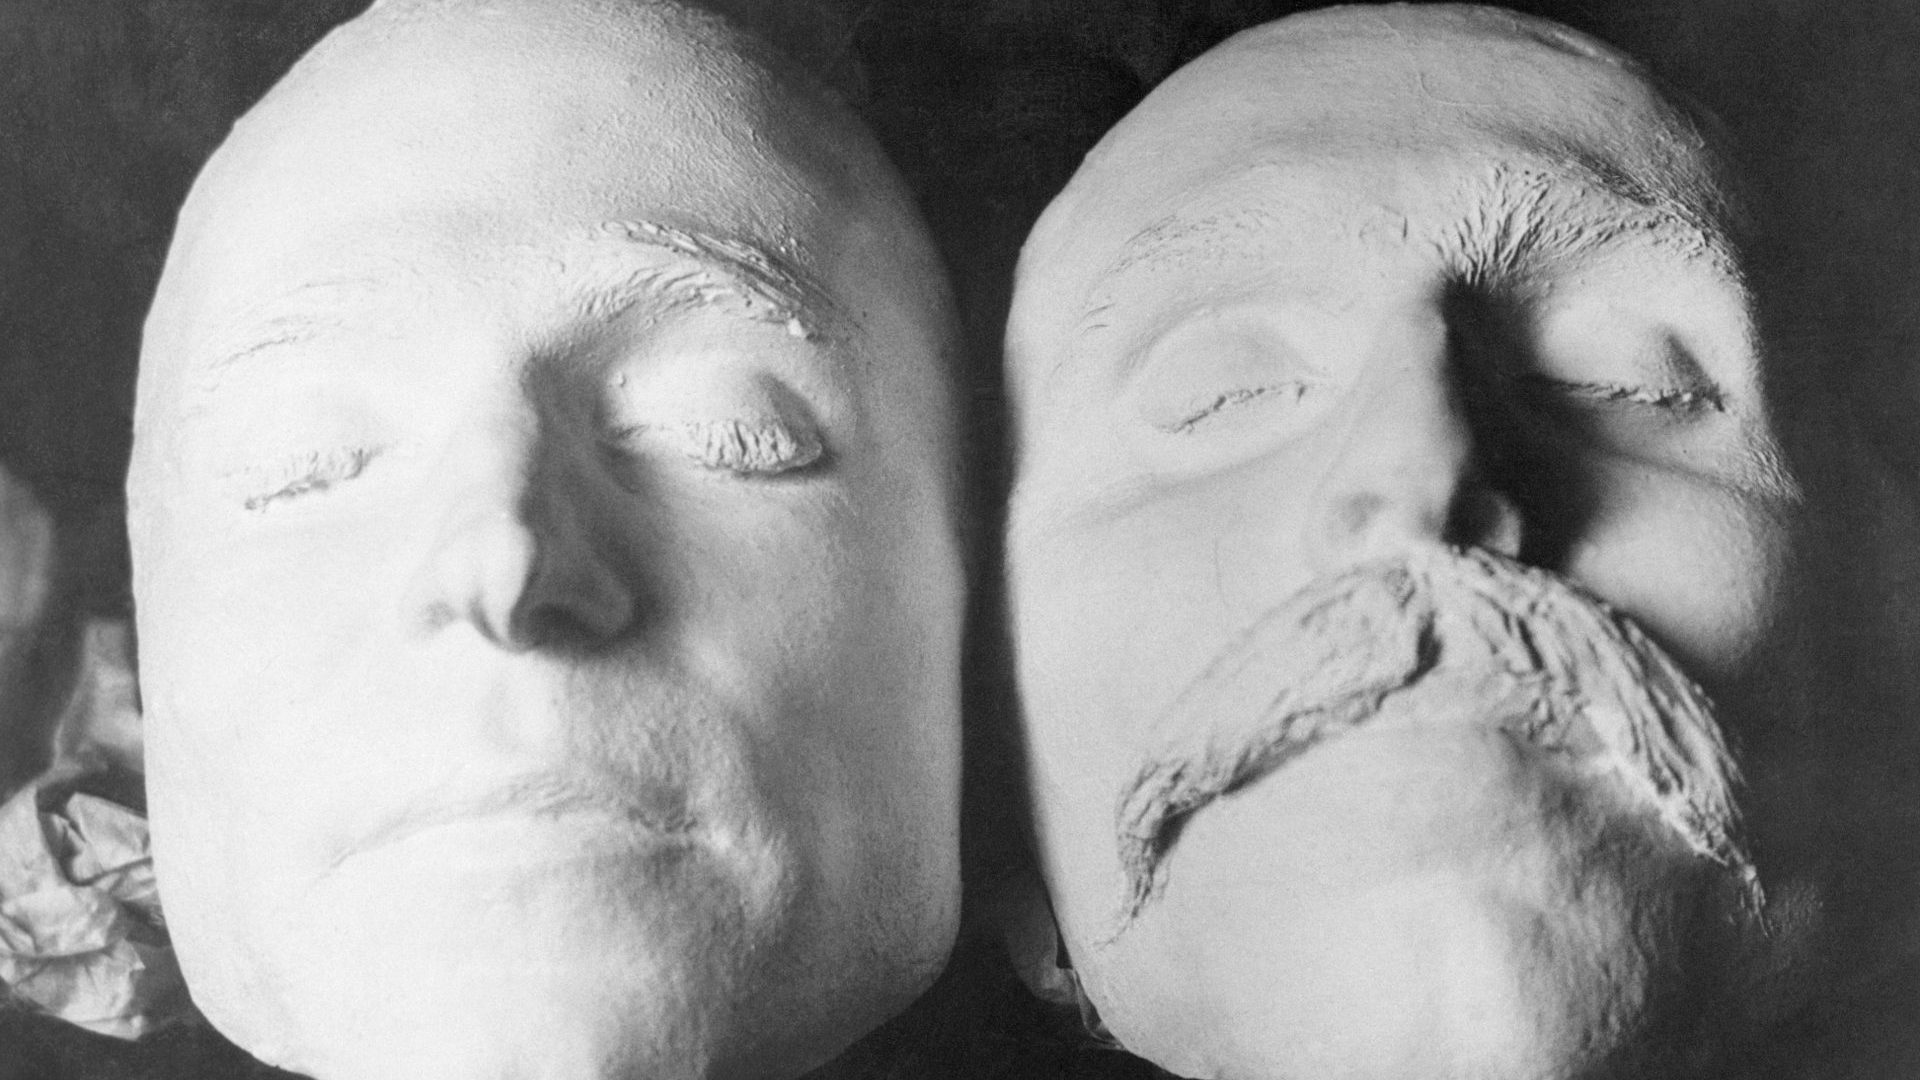 The death masks of Nicola Sacco and Bartolomeo Vanzetti, 
who were executed in 1927. Photo: Bettmann/Getty